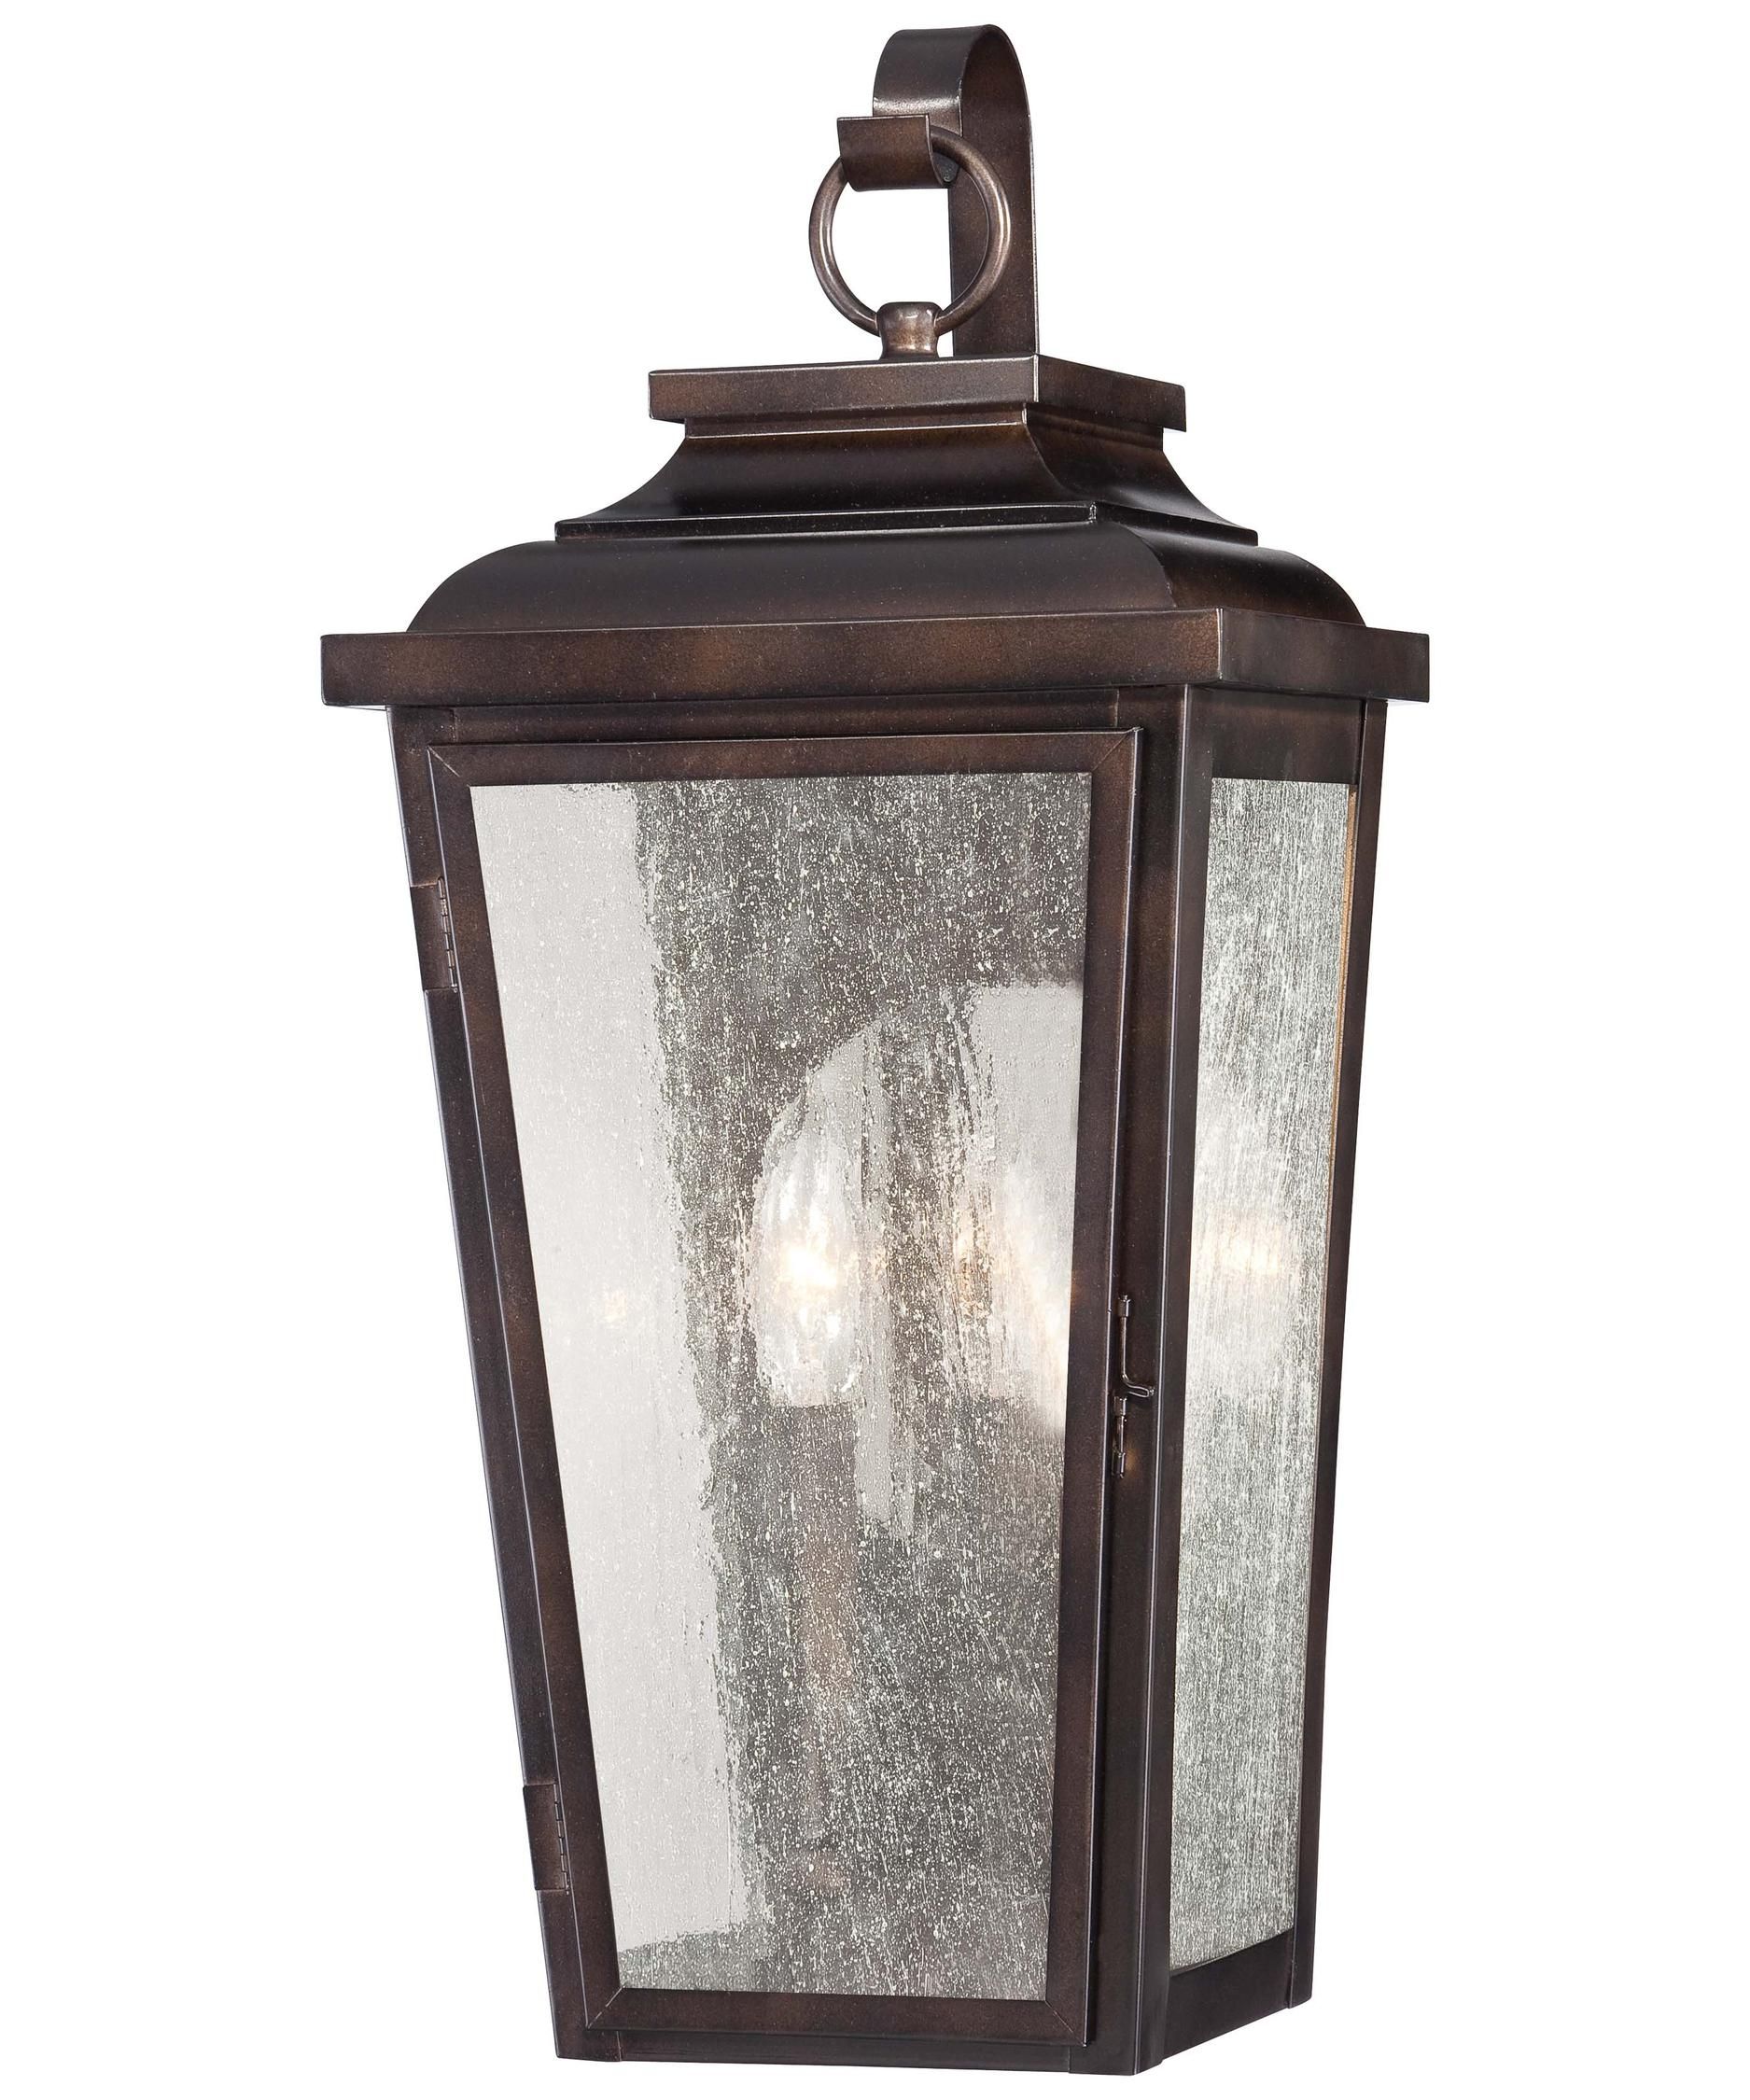 Minka Lavery 72170 Irvington Manor 9 Inch Wide 2 Light Outdoor Wall Intended For Outdoor Wall Lighting With Seeded Glass (View 2 of 15)